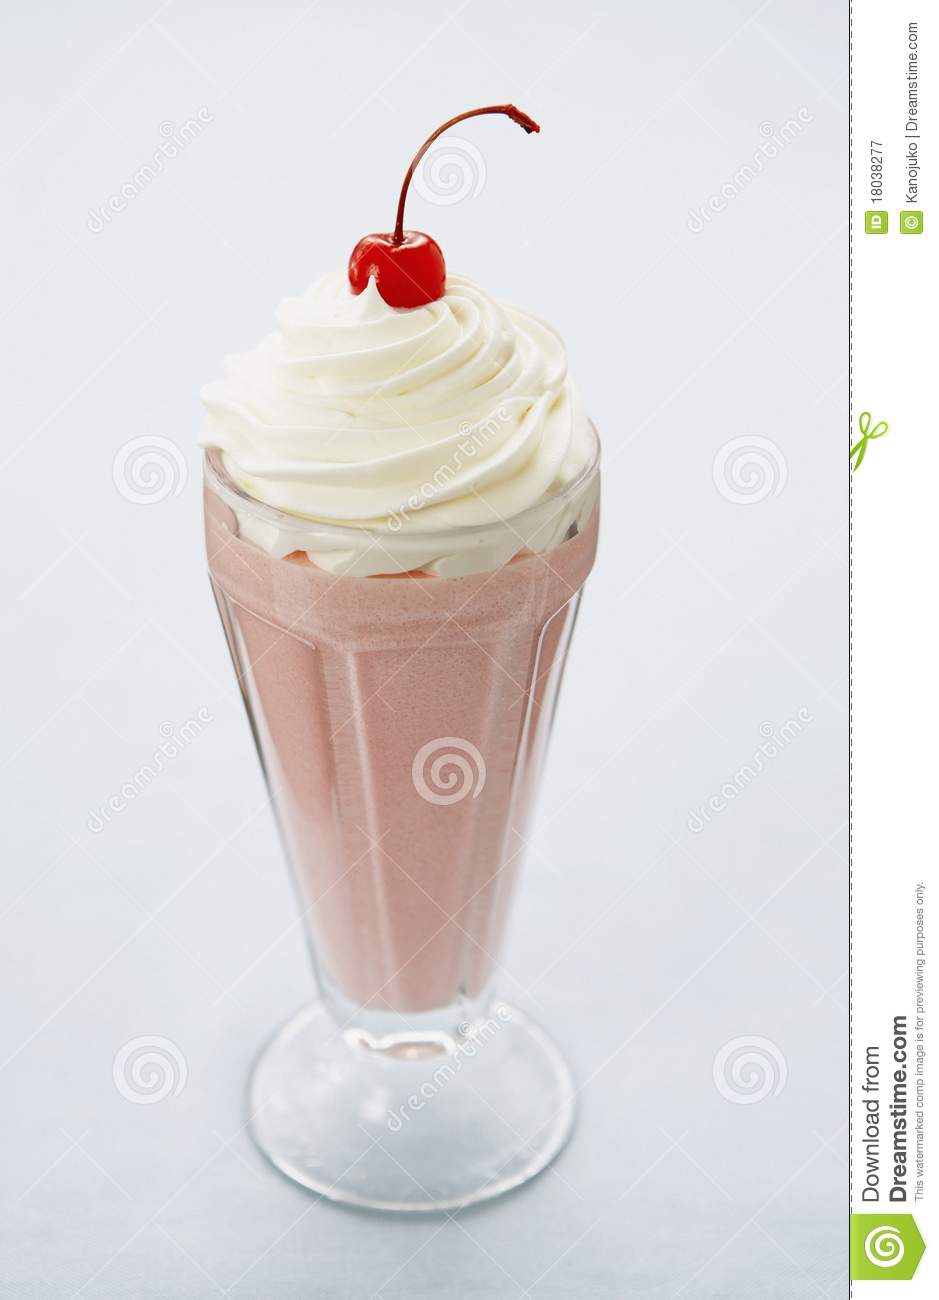 Milkshake With Whipped Cream And Cherry Royalty Free Stock Photography